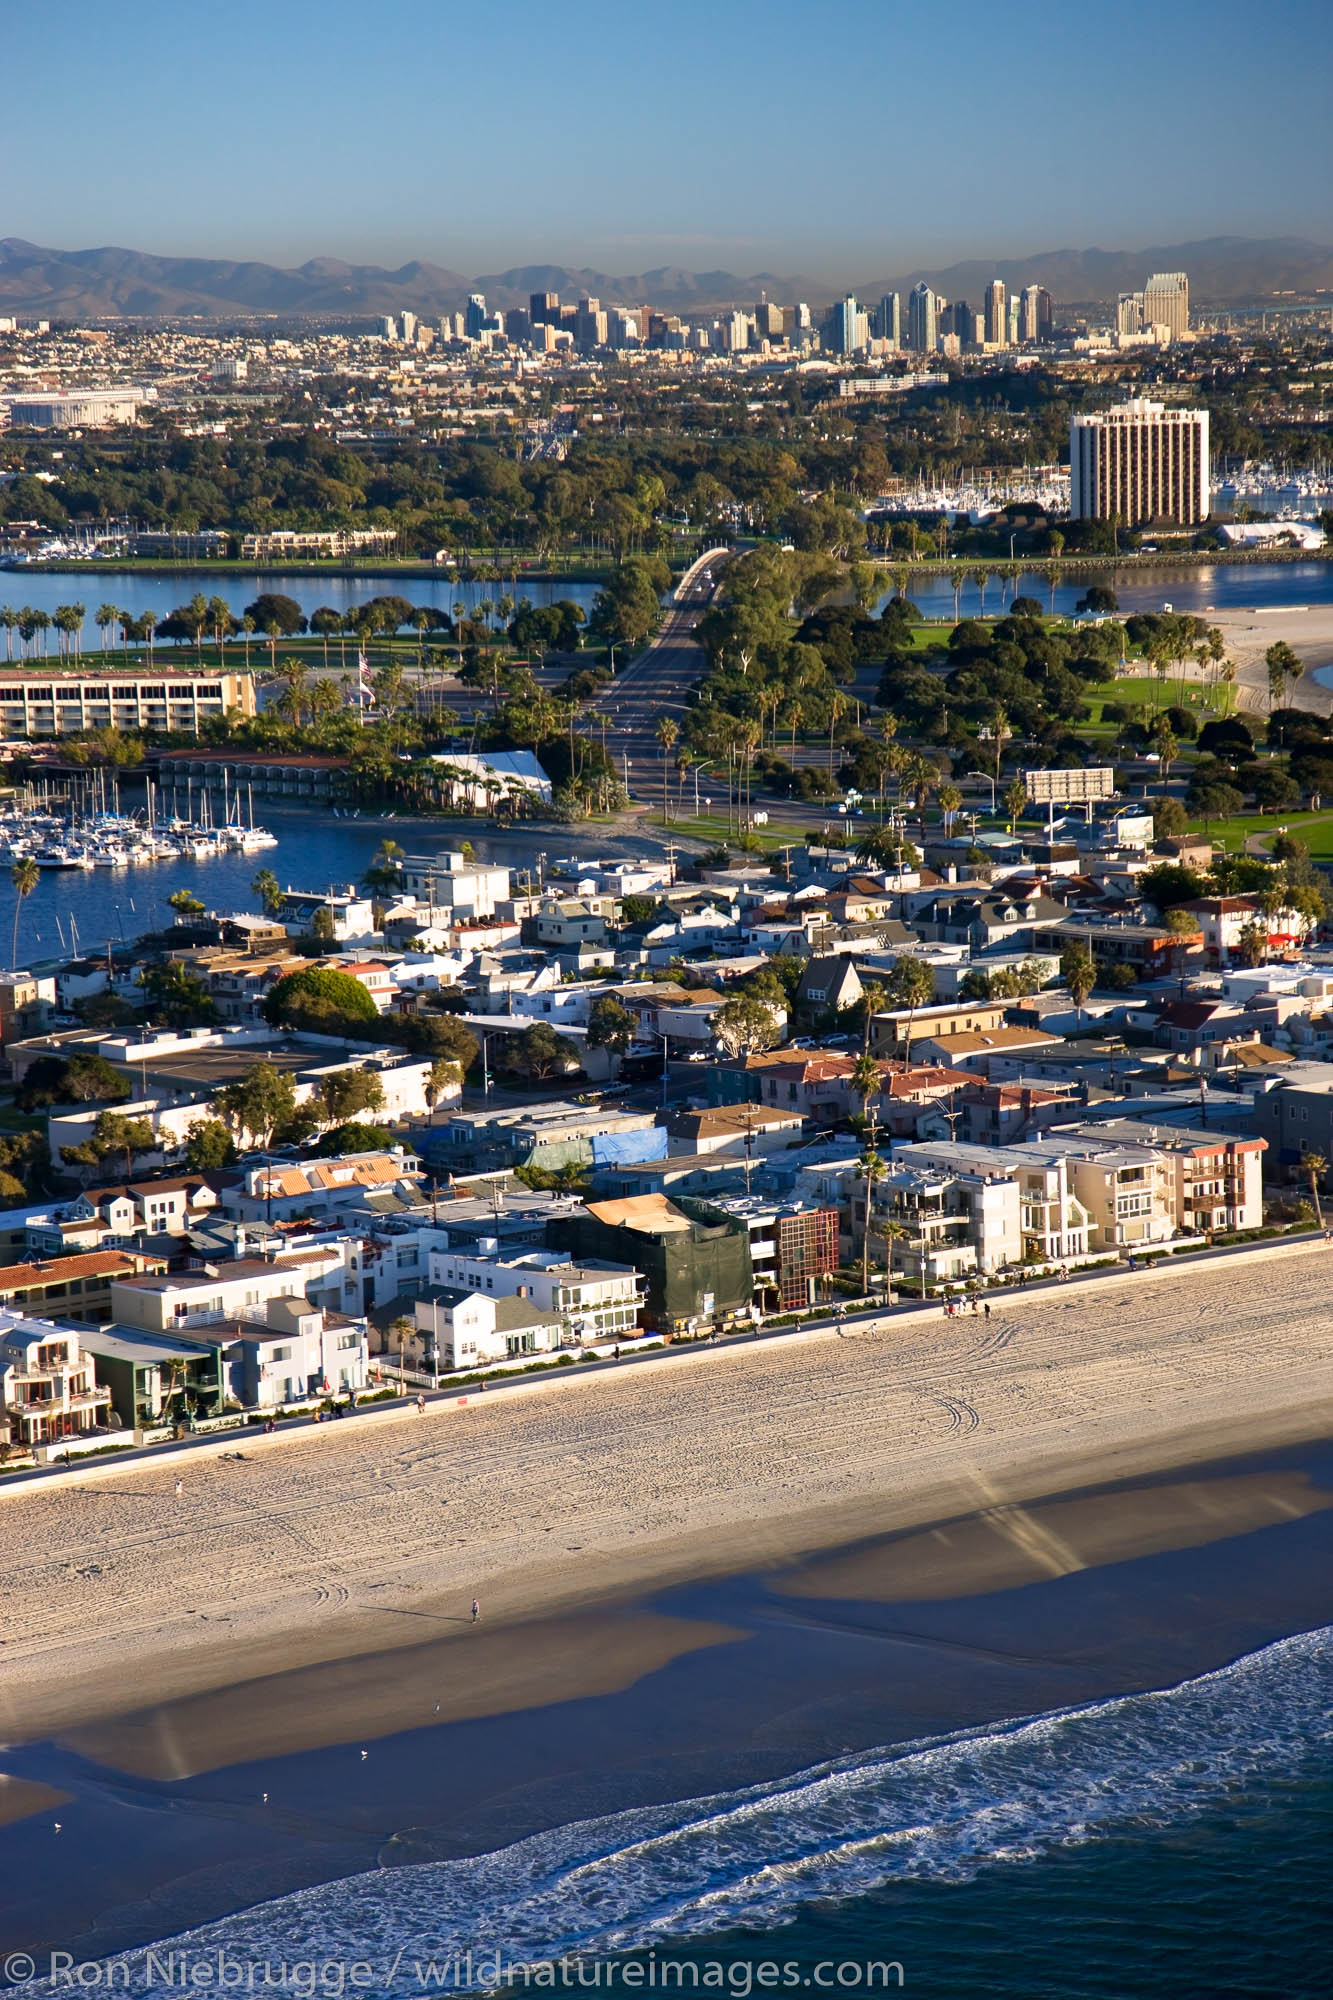 Mission Beach and Mission Bay, San Diego, California.